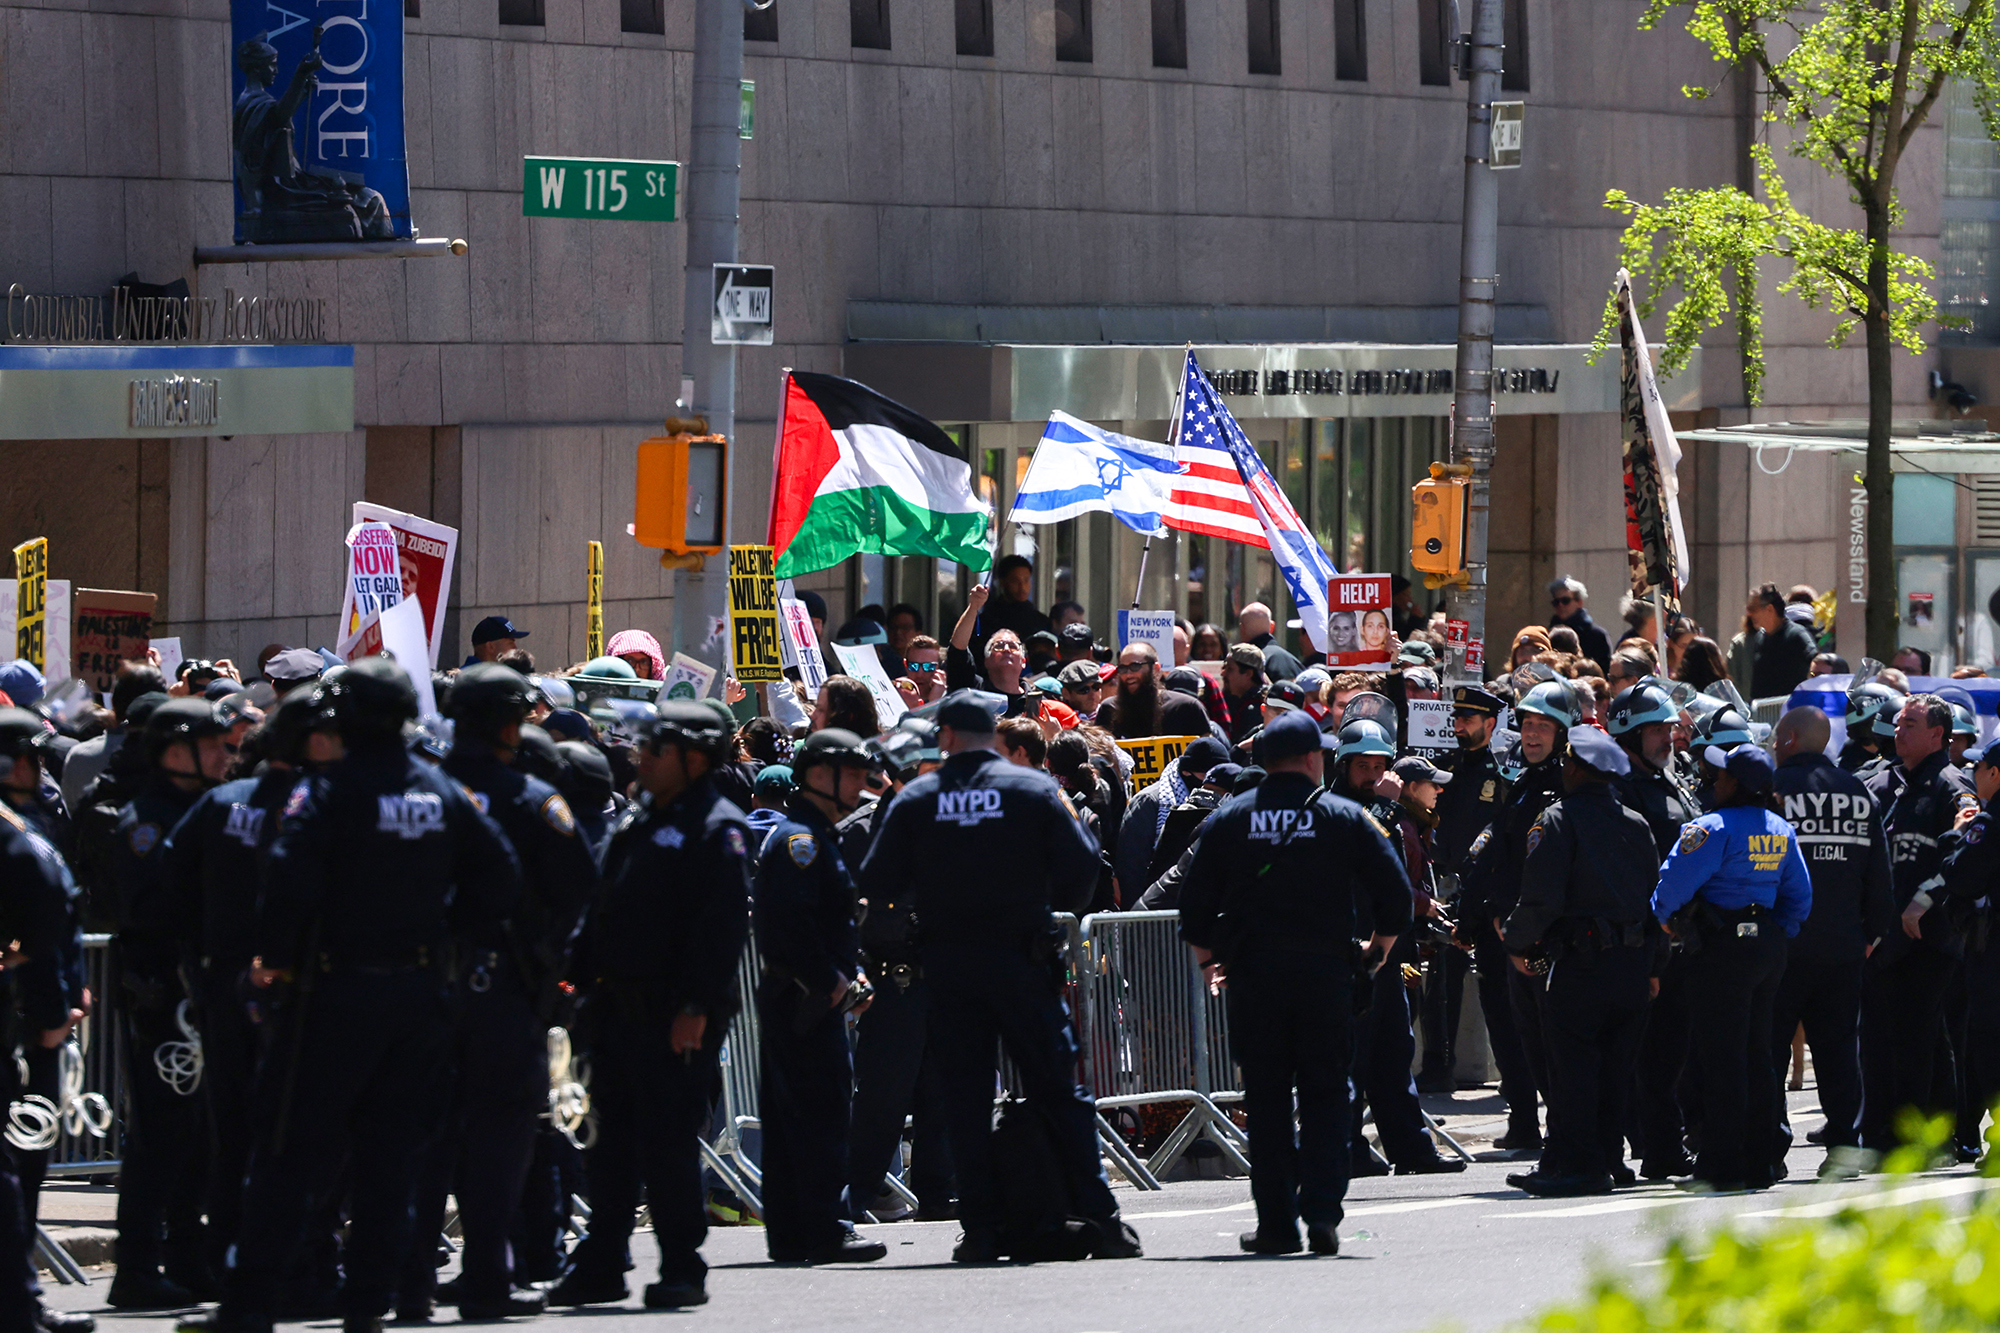 Pro-Palestinian and Pro-israel protesters face off outside of Columbia University which is occupied by Pro-Palestinian protesters in New York on April 22.